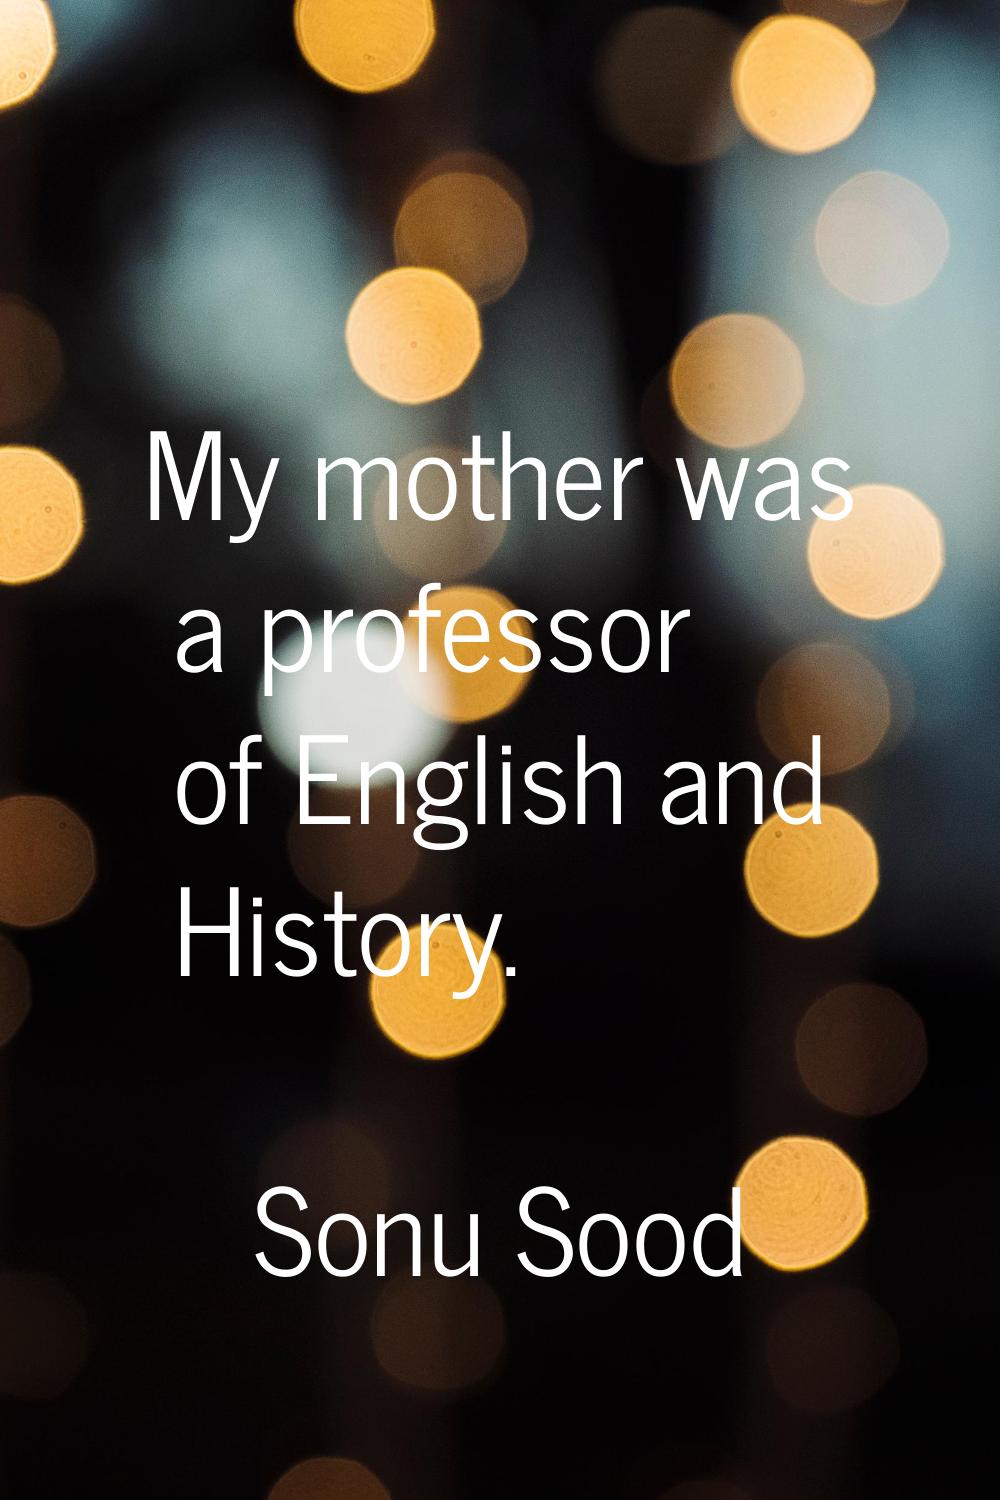 My mother was a professor of English and History.